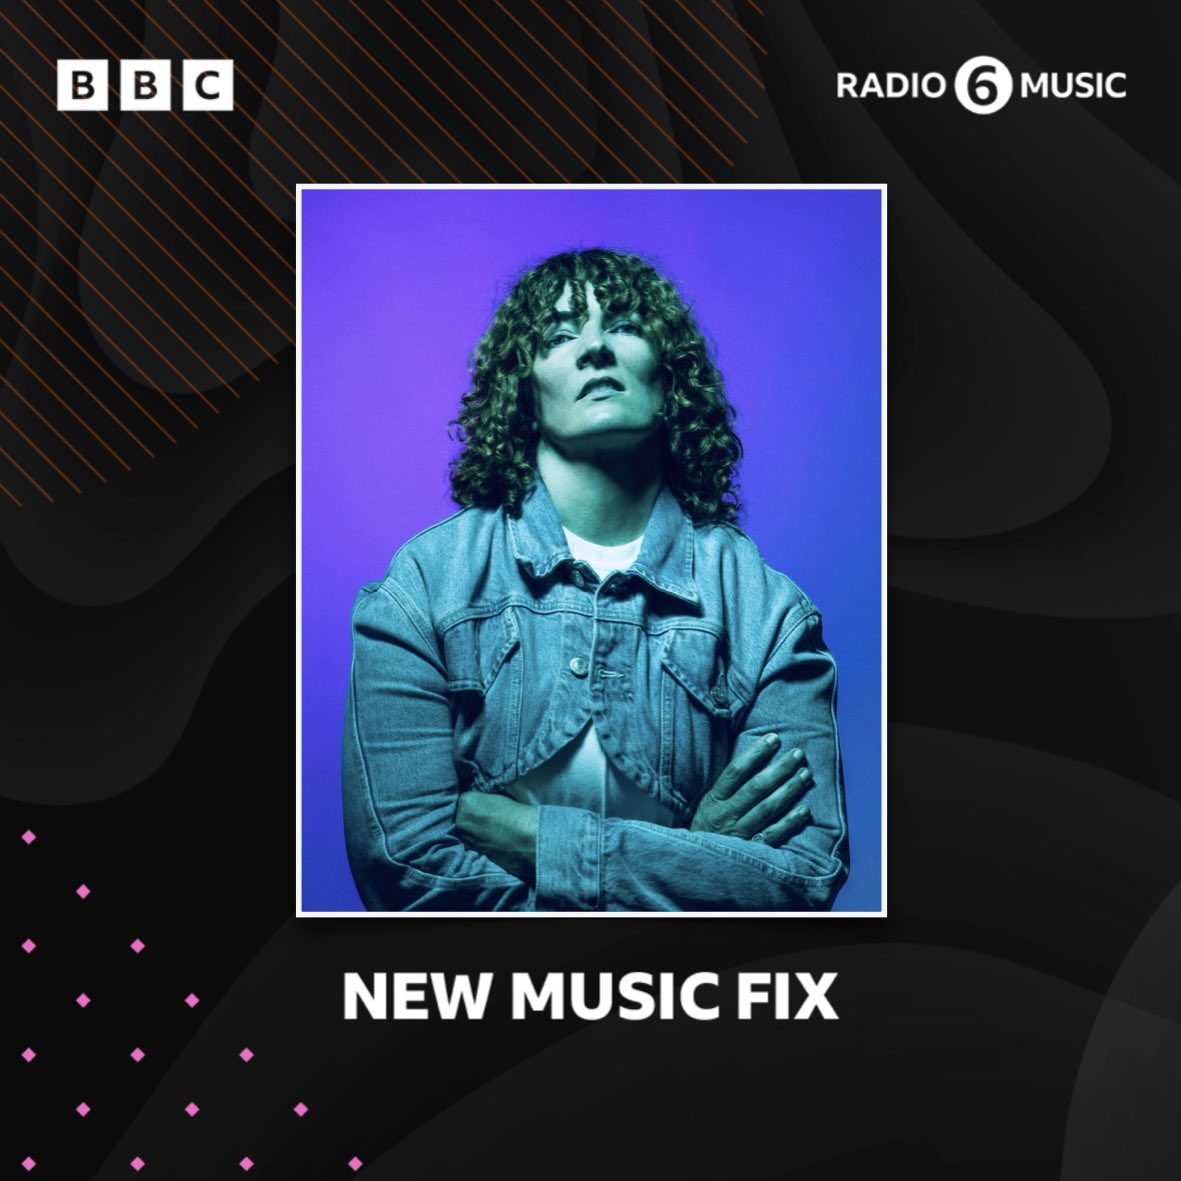 I’m excited to share that I will be sitting in for @maryannehobbs tonight to curate a 'New Music Fix' show. Feat. Music by @BabyWeightMusic @TomGlitter @TAAHLIAH and more. If you can’t listen in tonight you can catch me show on the @bbc6music app